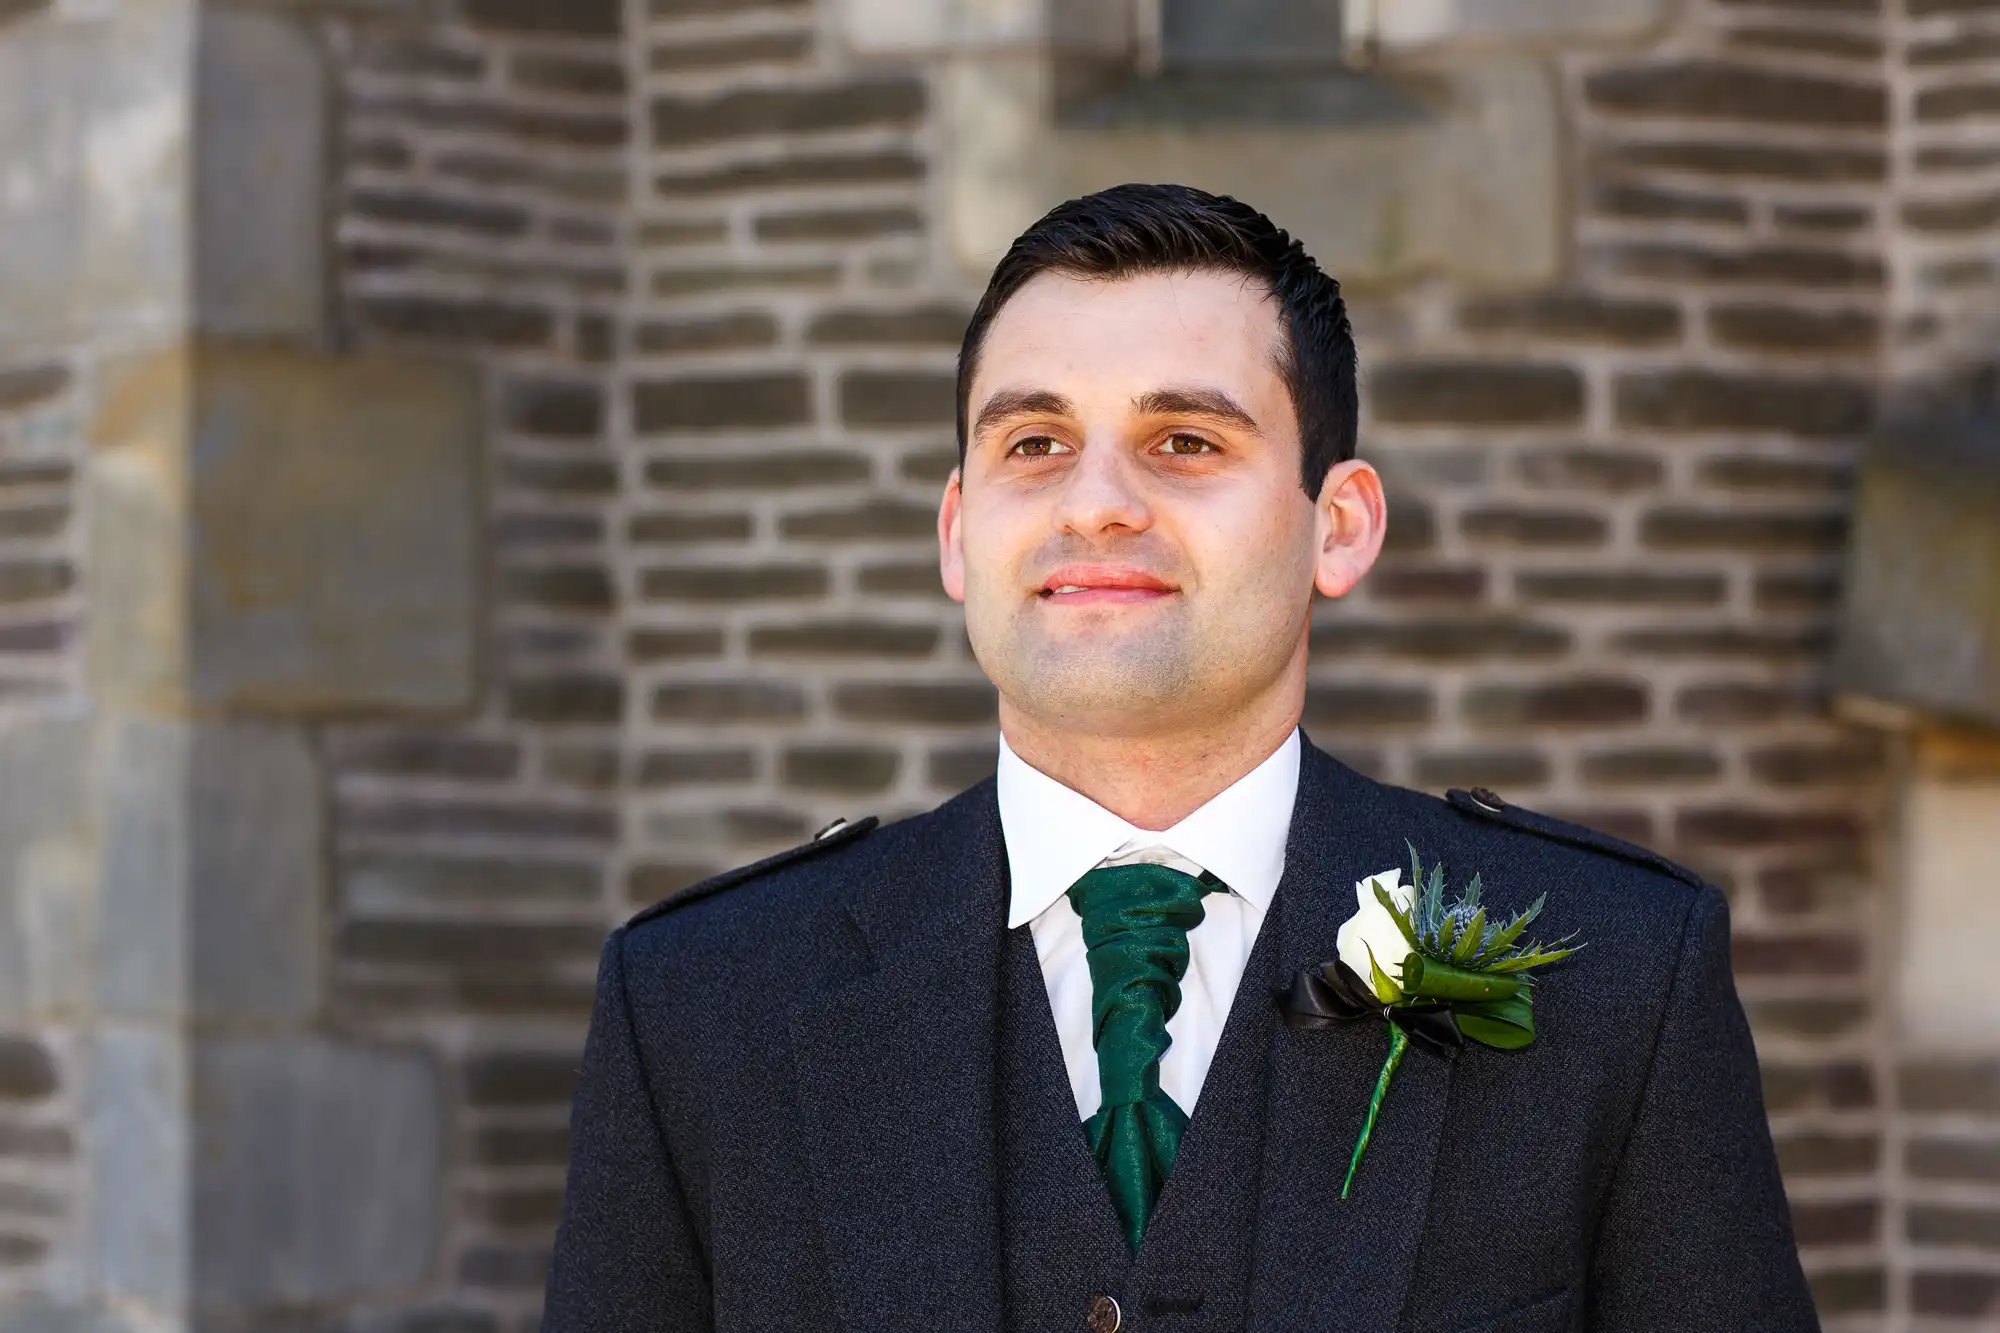 Man in a dark suit with green accents and a white rose boutonniere, smiling outside in front of a brick wall.